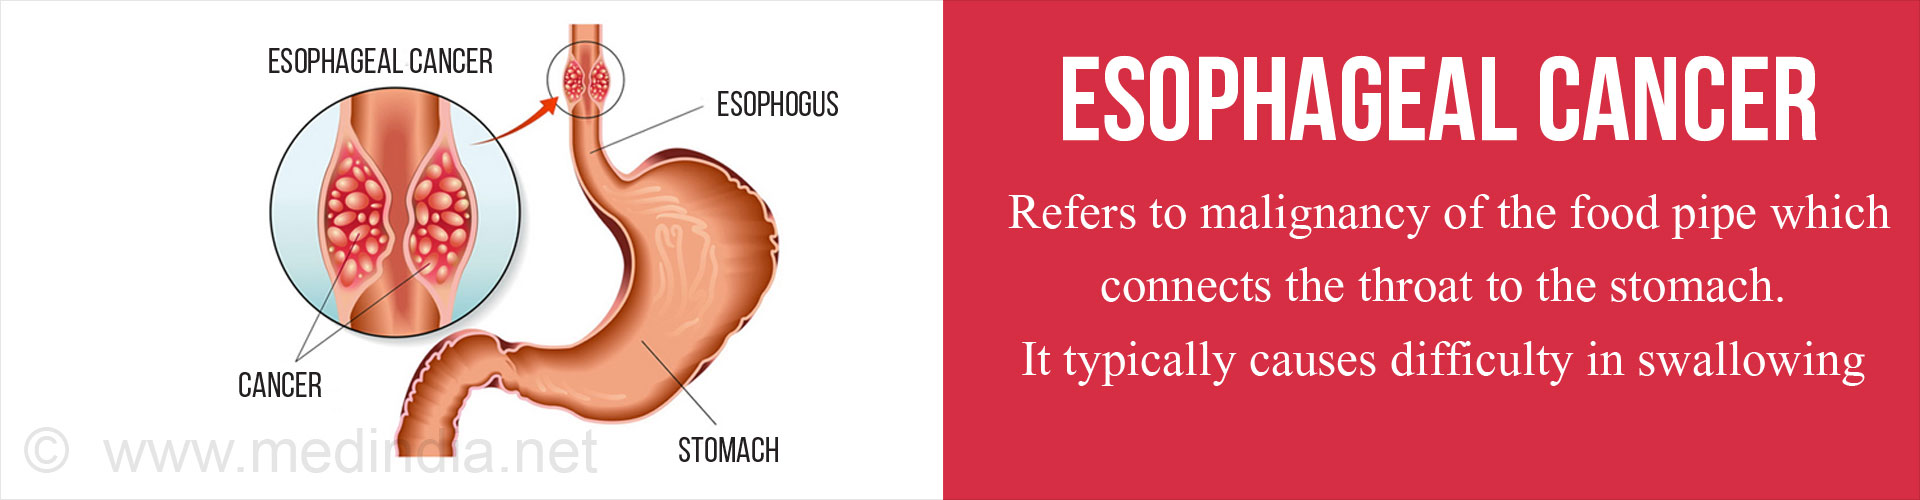 What are the symptoms of esophageal cancer?